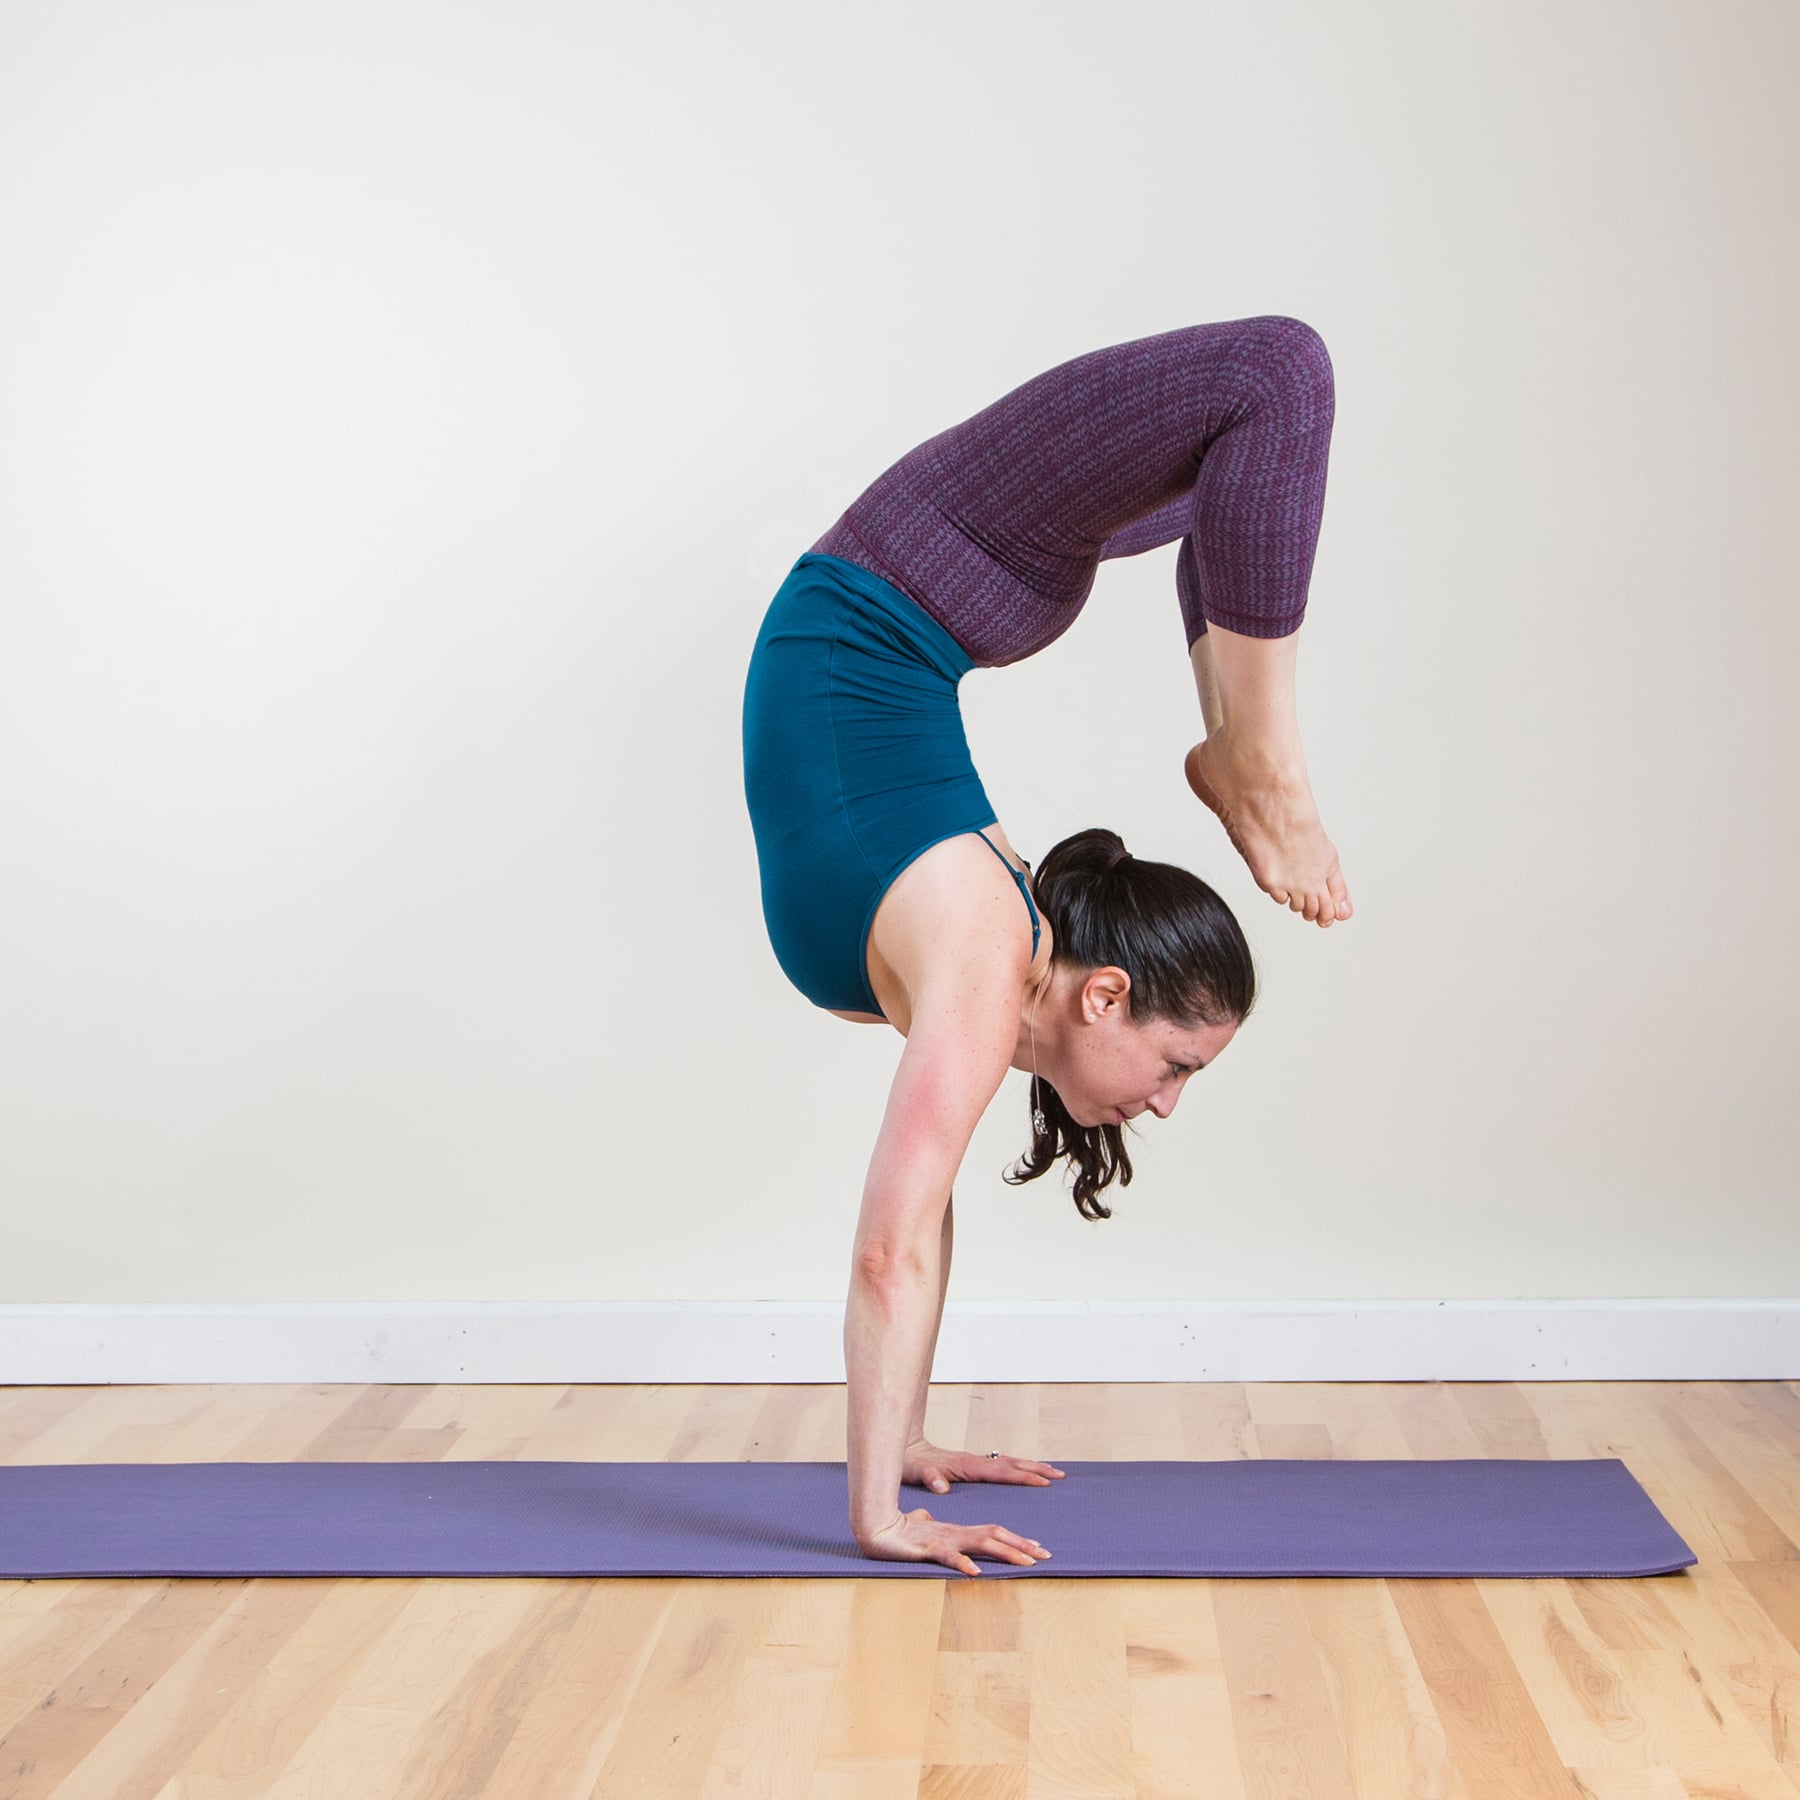 extreme asana  Yoga poses for beginners, Yoga poses pictures, Yoga poses